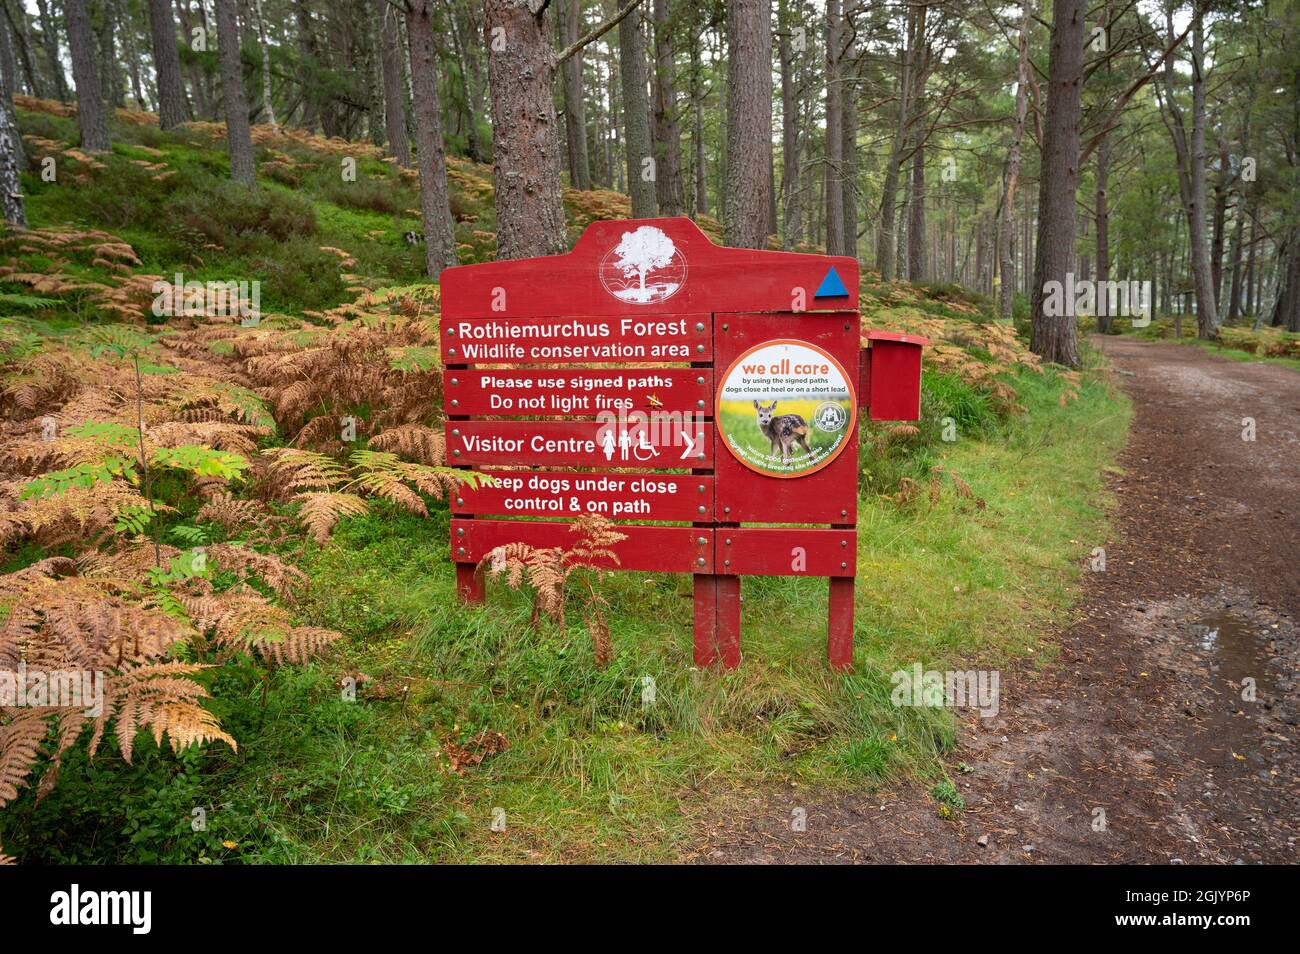 Red and white sign for Rochiemurchus Forest Wildlife Conservation Area in Cairngorms National Park. Path and blurred forest background. Stock Photo